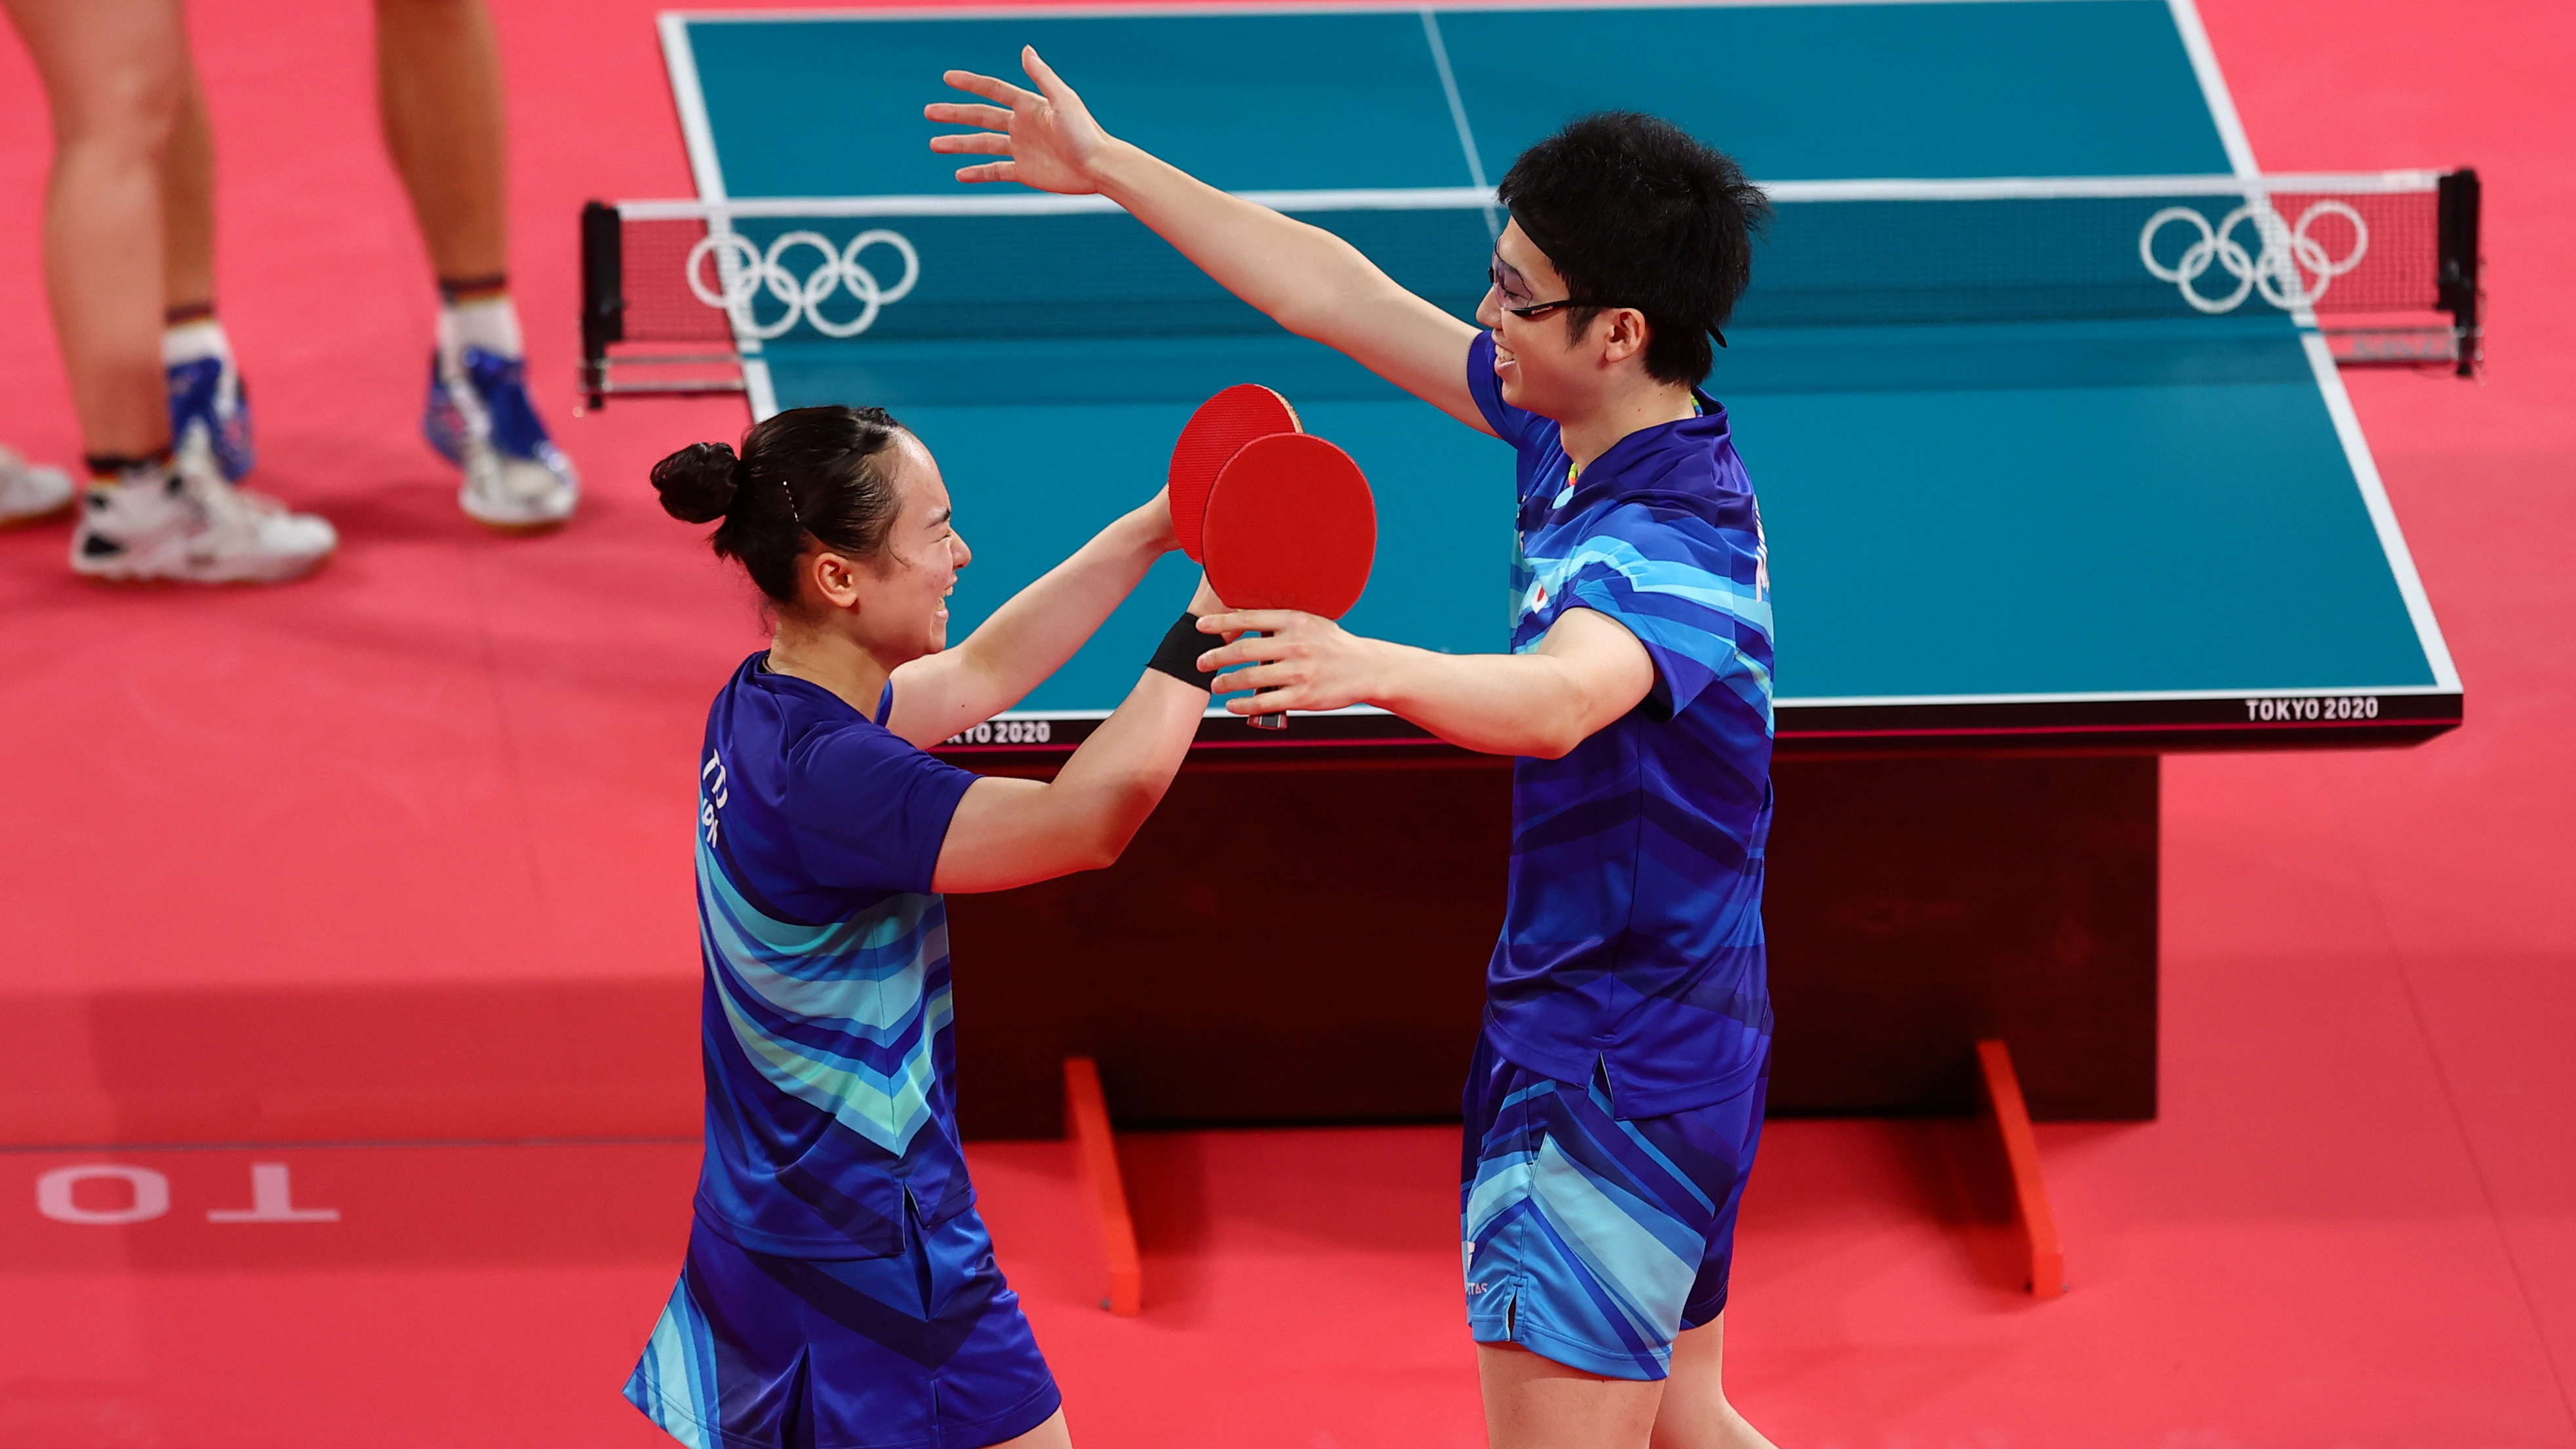 Sincerely Beautiful woman compensation Table Tennis-Chinese, Japanese pairs make first mixed doubles final |  Reuters